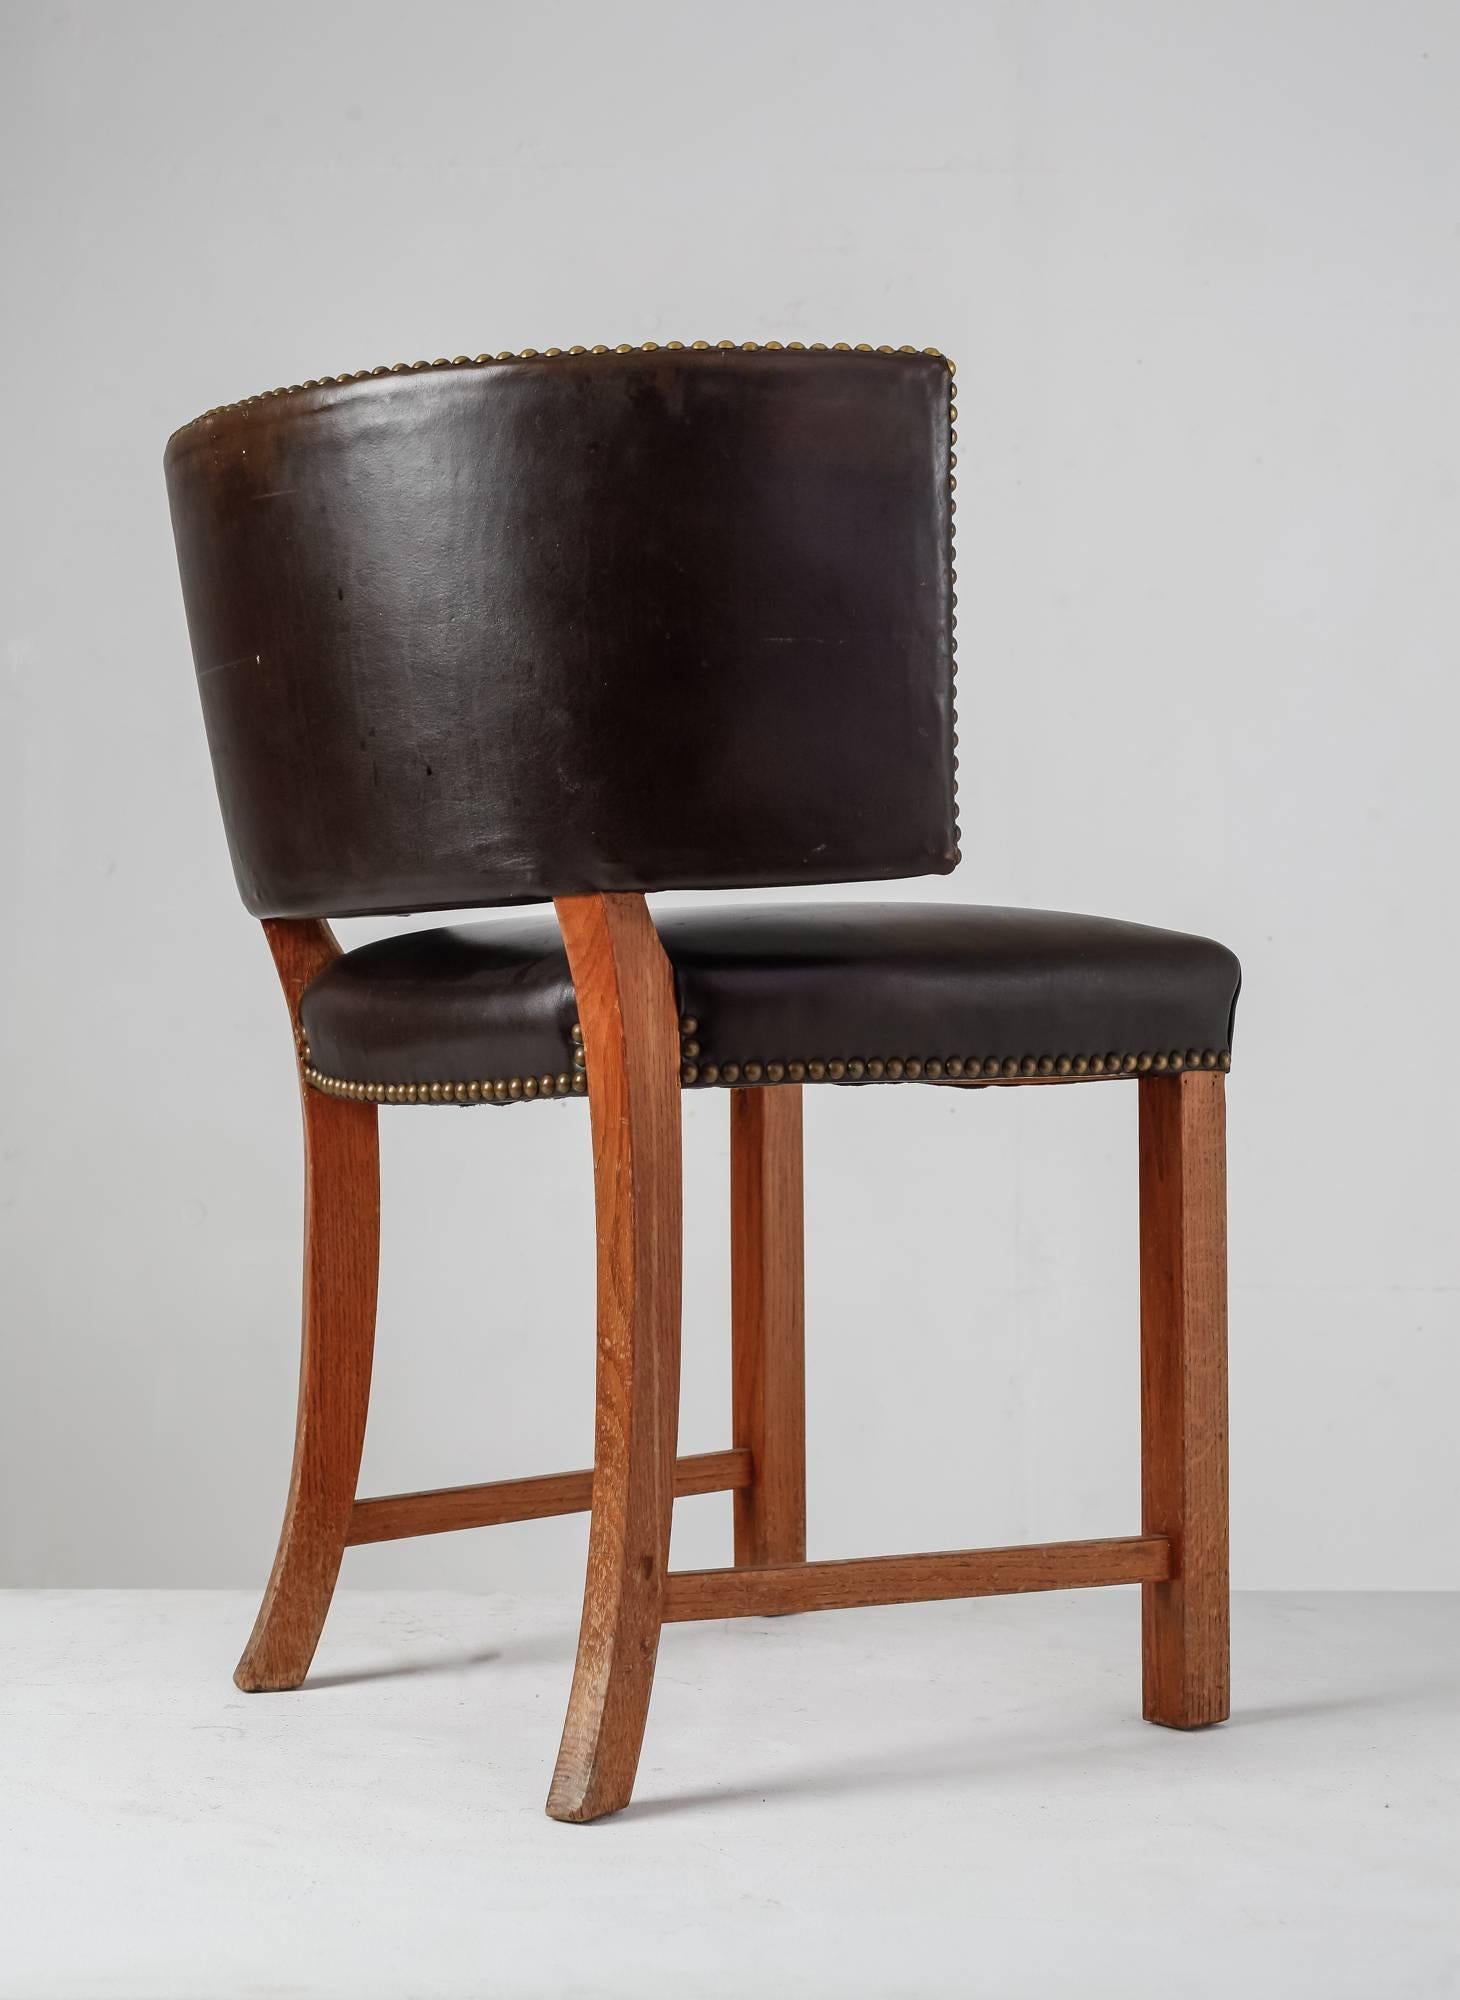 Scandinavian Modern Danish Oak and Leather Sidechair with Large, Curved Backrest, 1930s For Sale